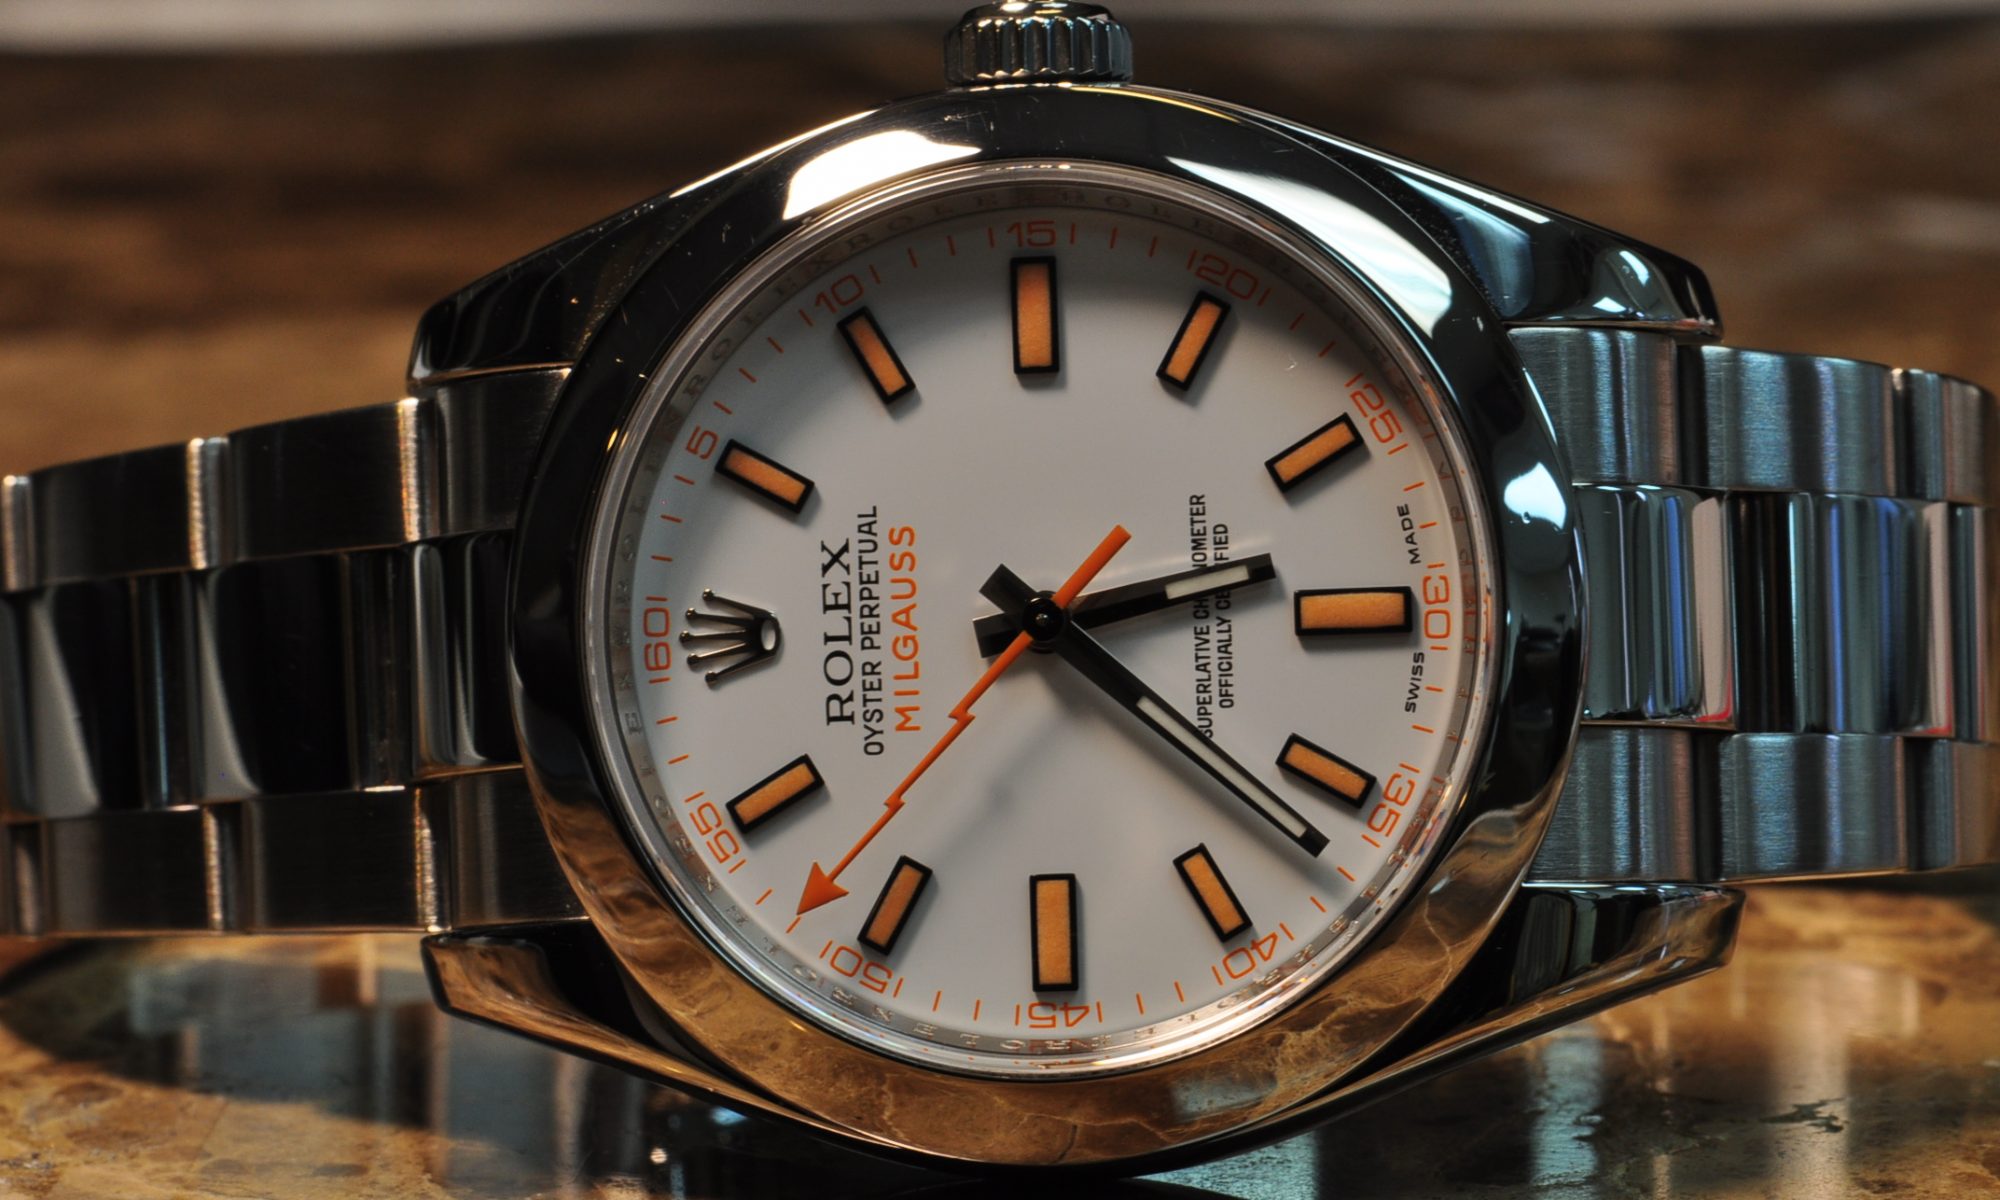 The Oystersteel fake watch has a white dial.